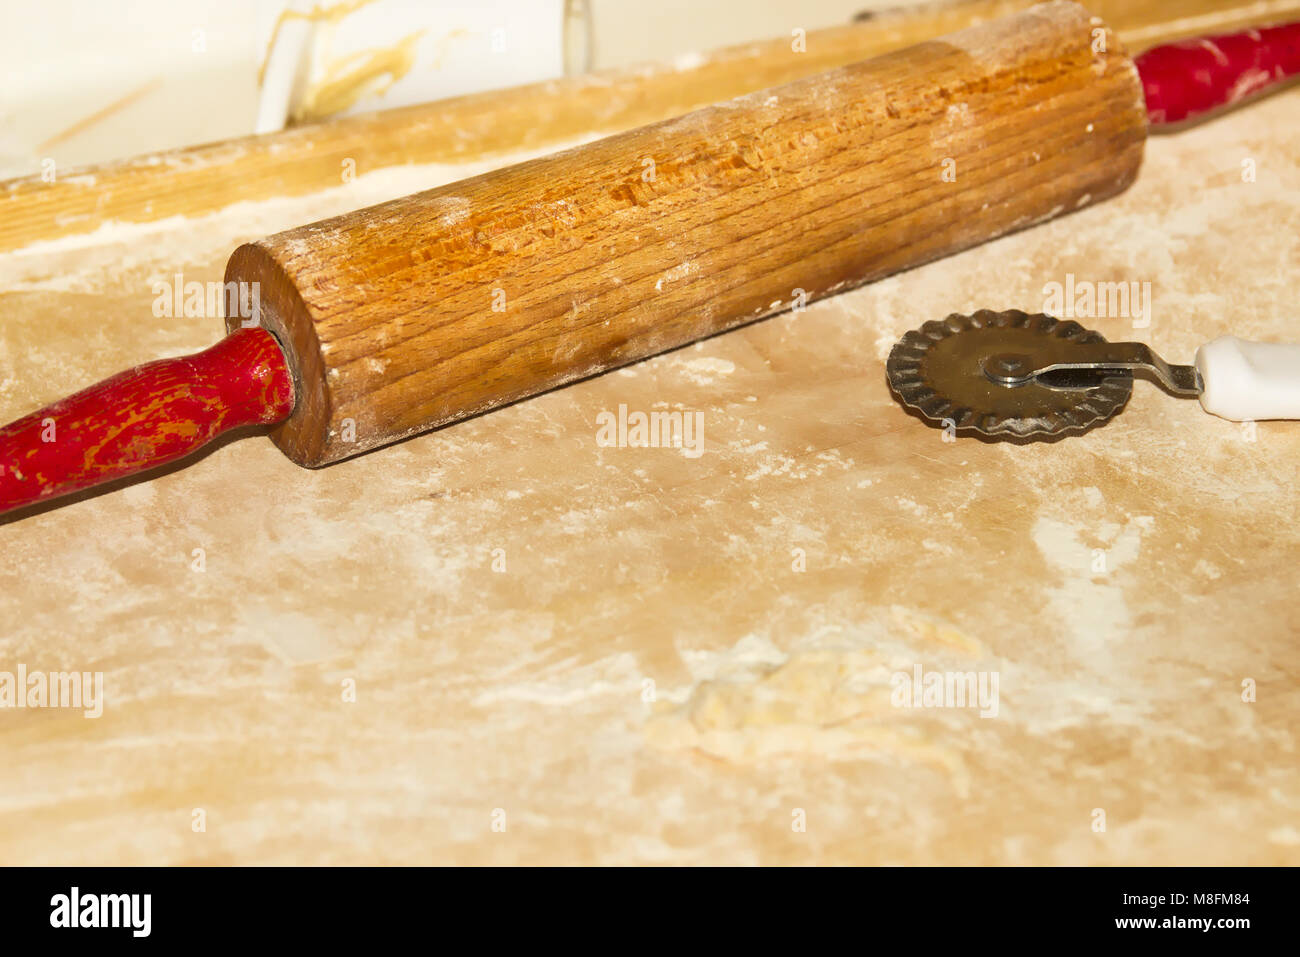 Roller Pin on Wooden Table in Domestic Kitchen Stock Photo